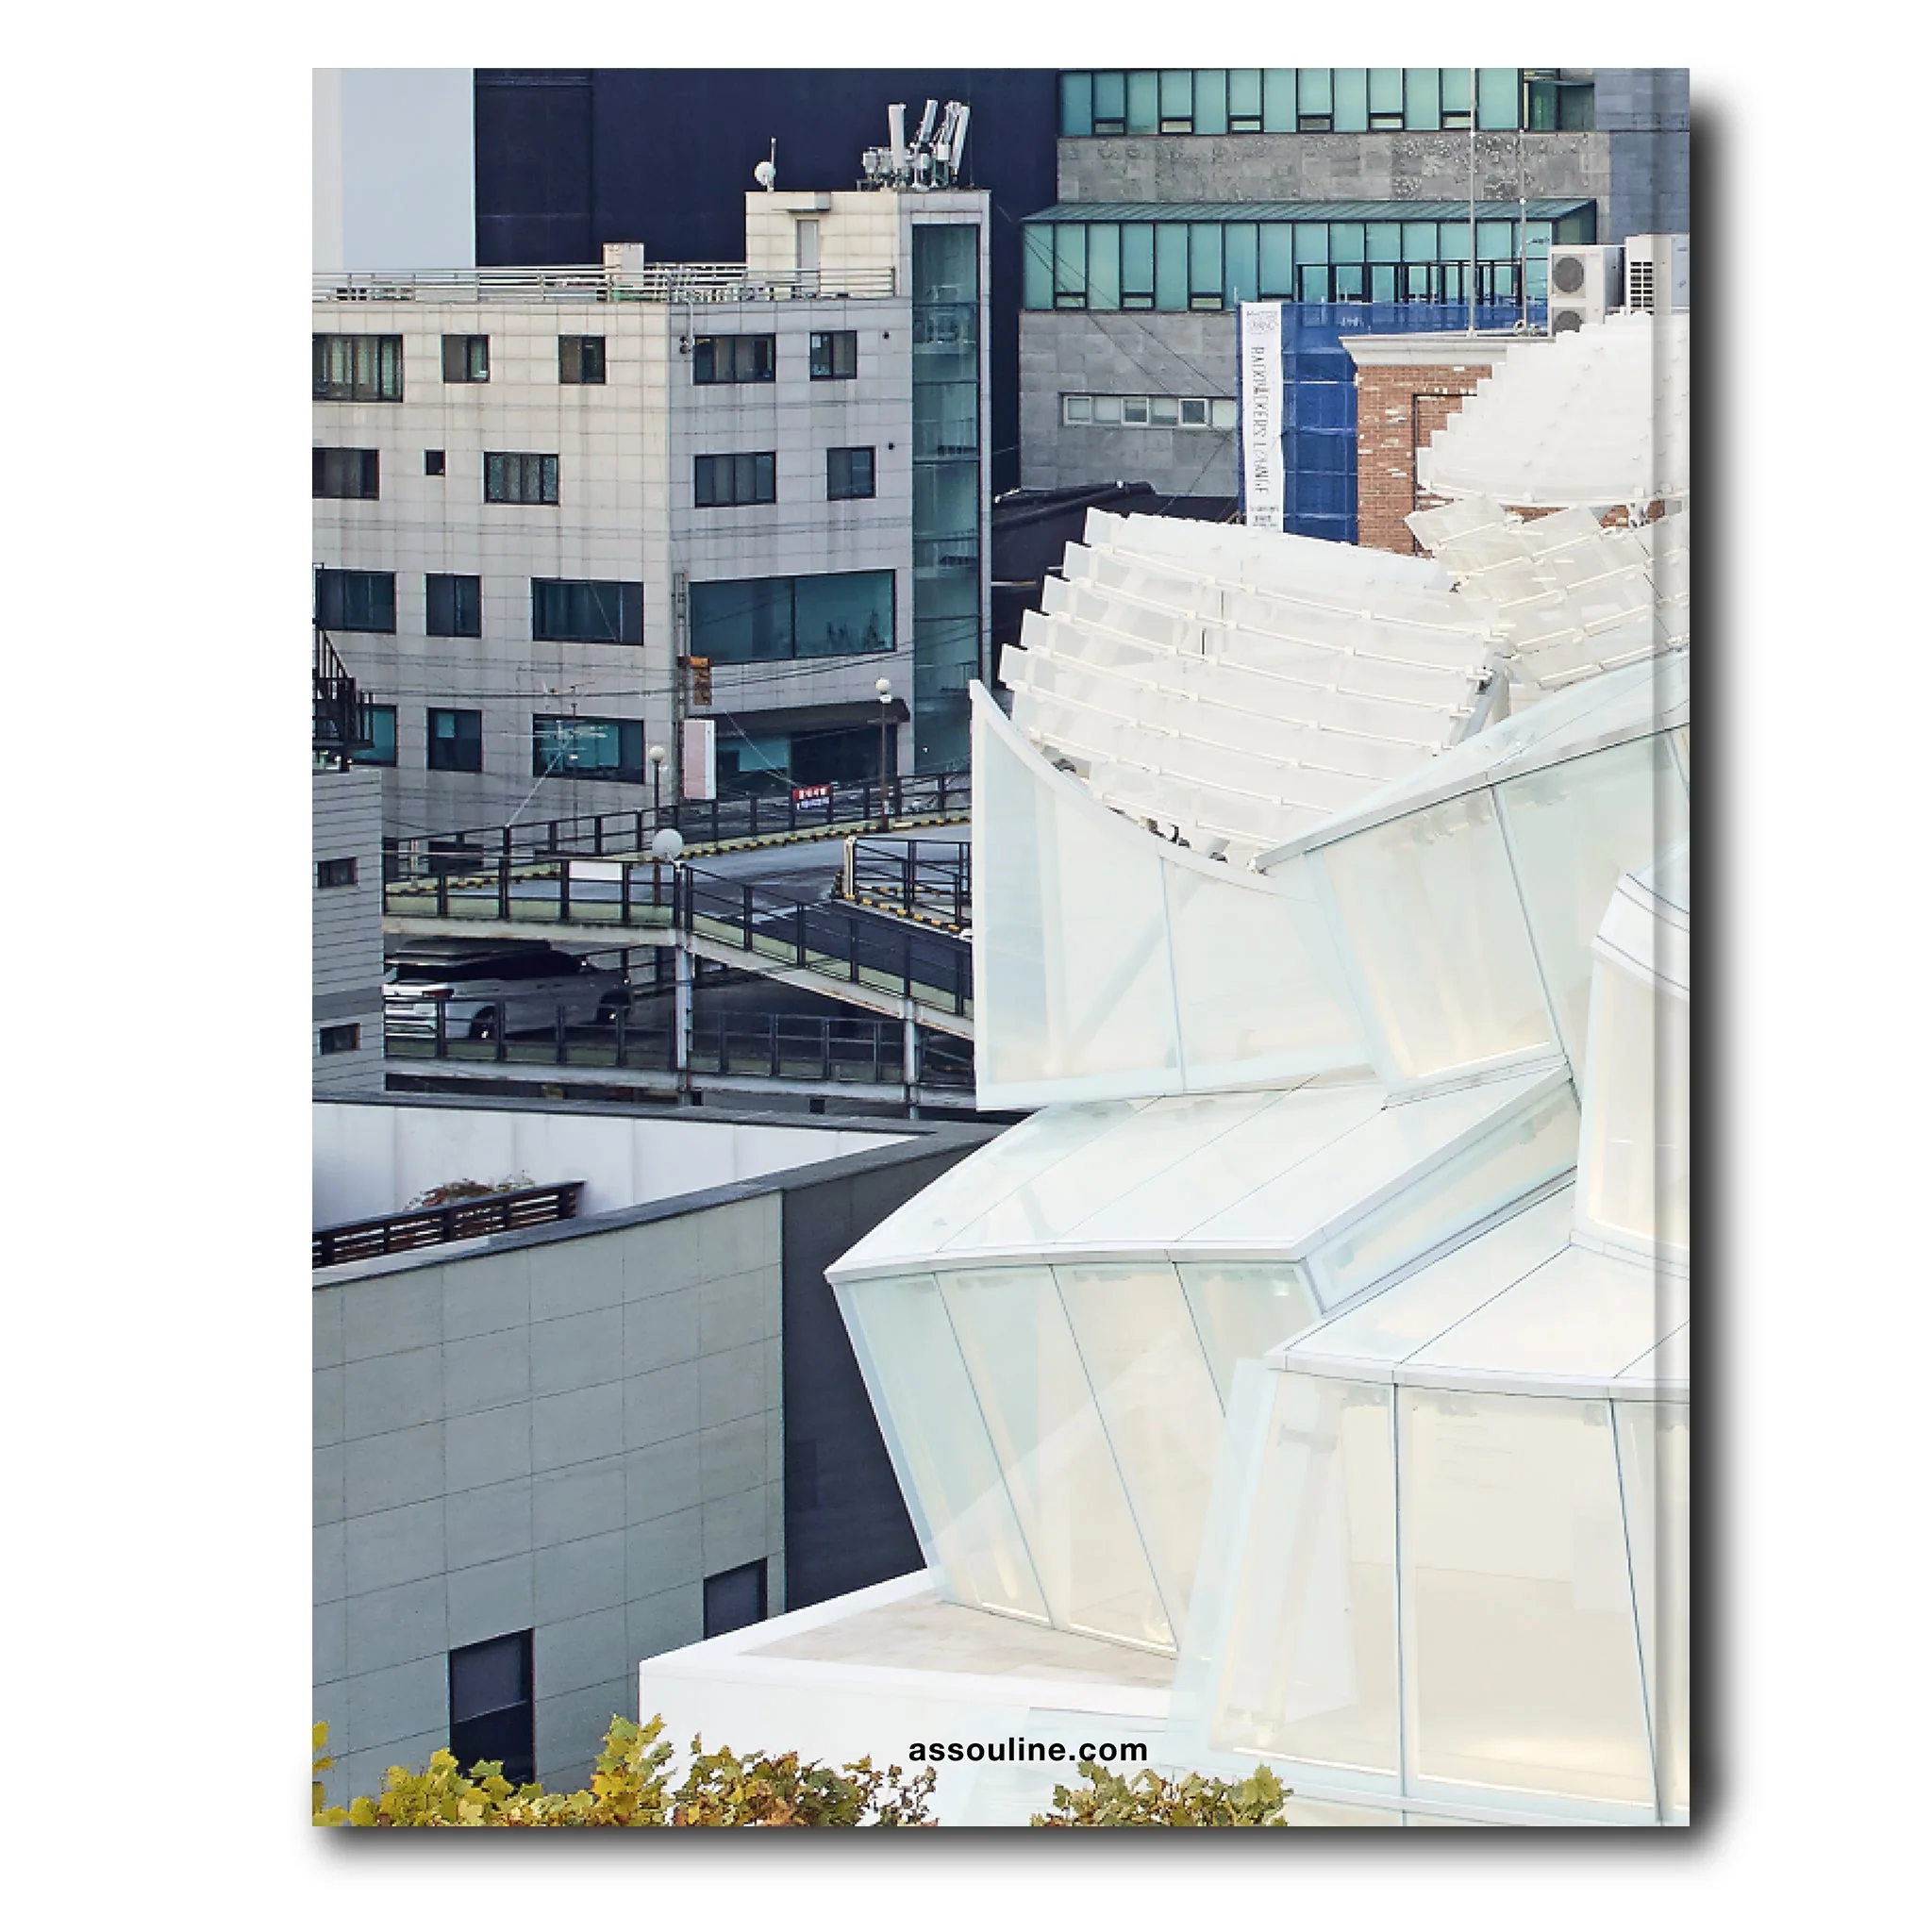 Louis Vuitton Skin: Architecture of Luxury (Seoul Edition) by Paul  Goldberger - Coffee Table Book